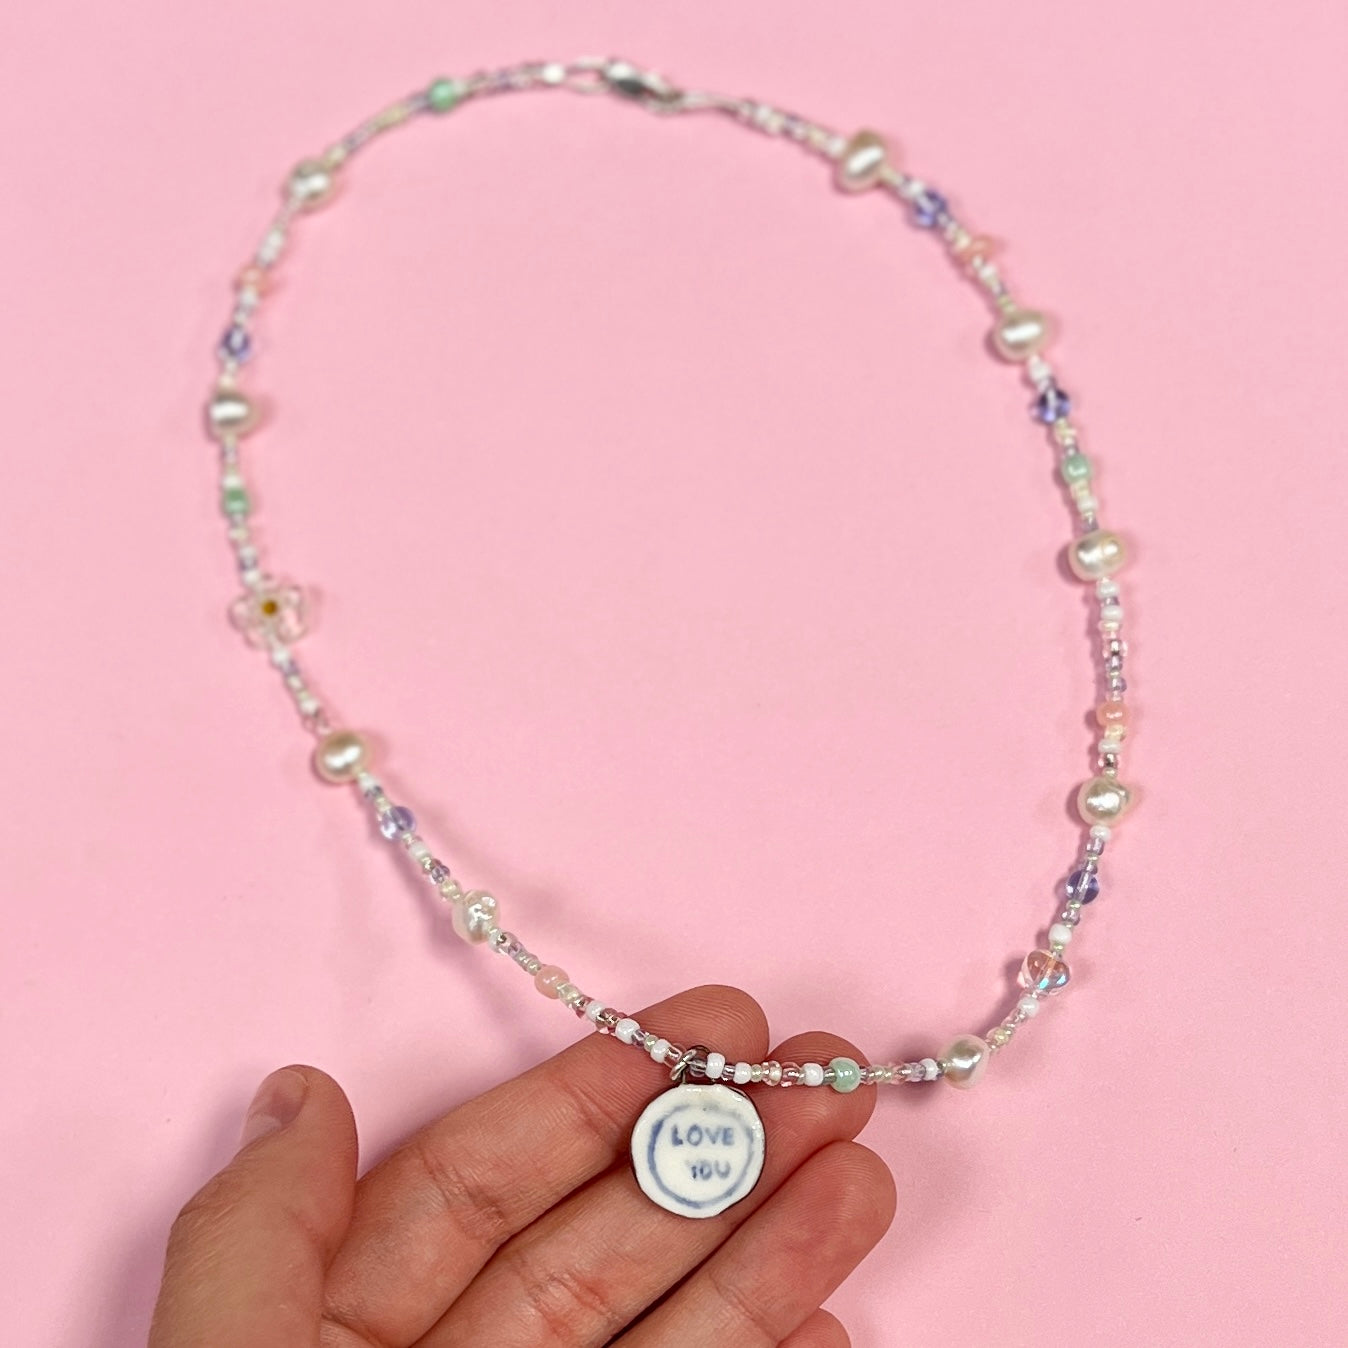 "Love you" Puppy Coin Necklace